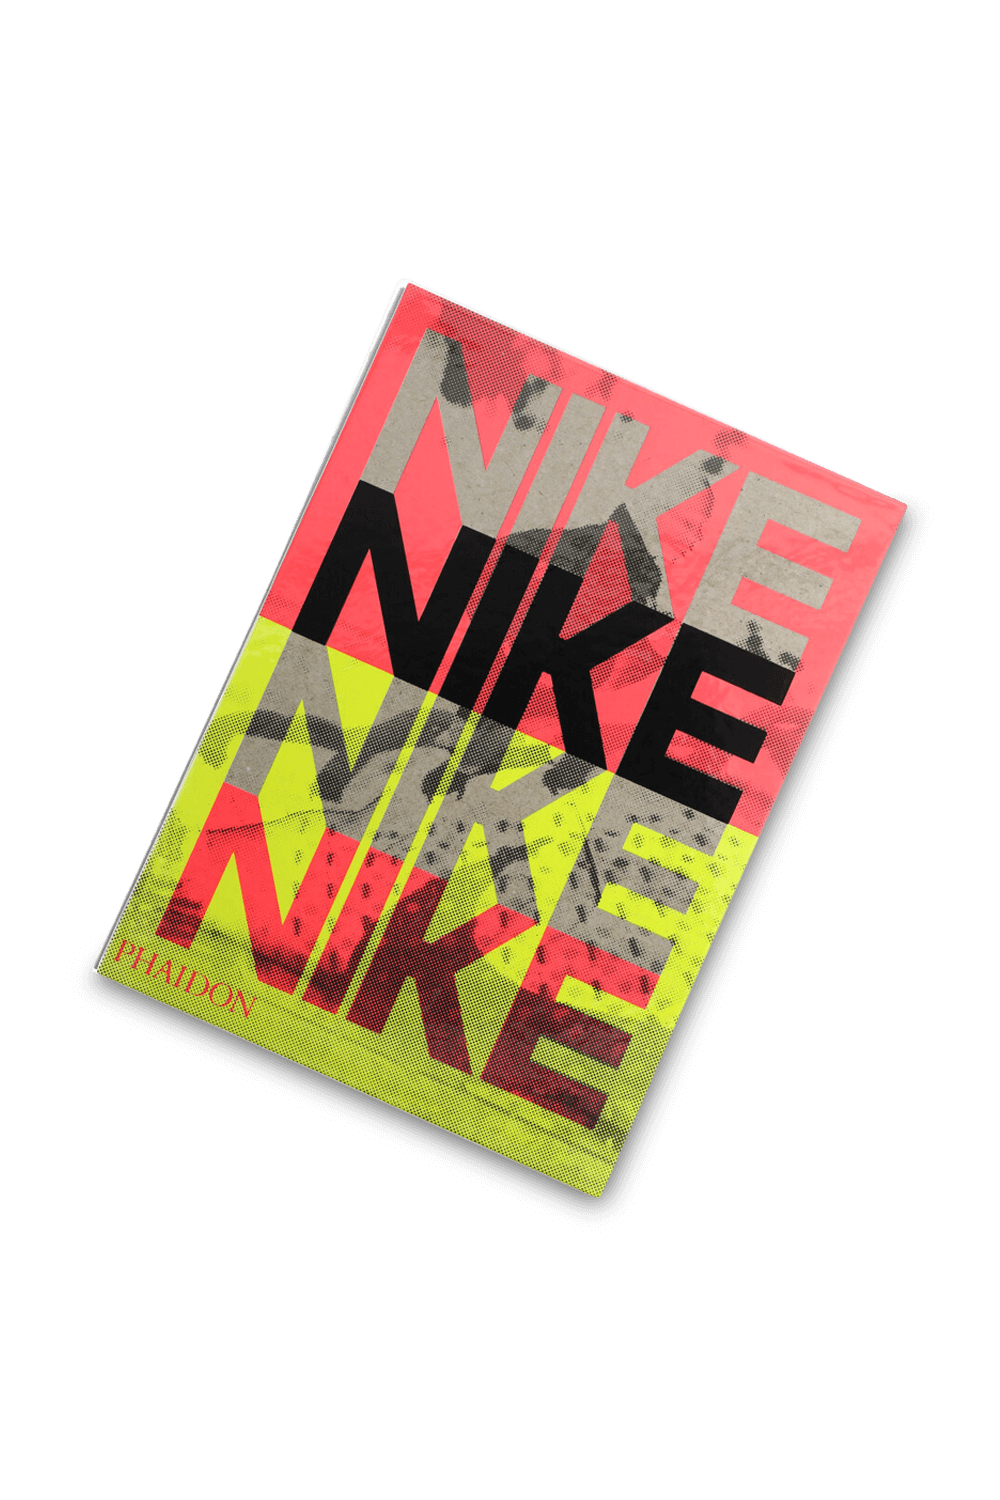 Nike: Better is Temporary PHAIDON